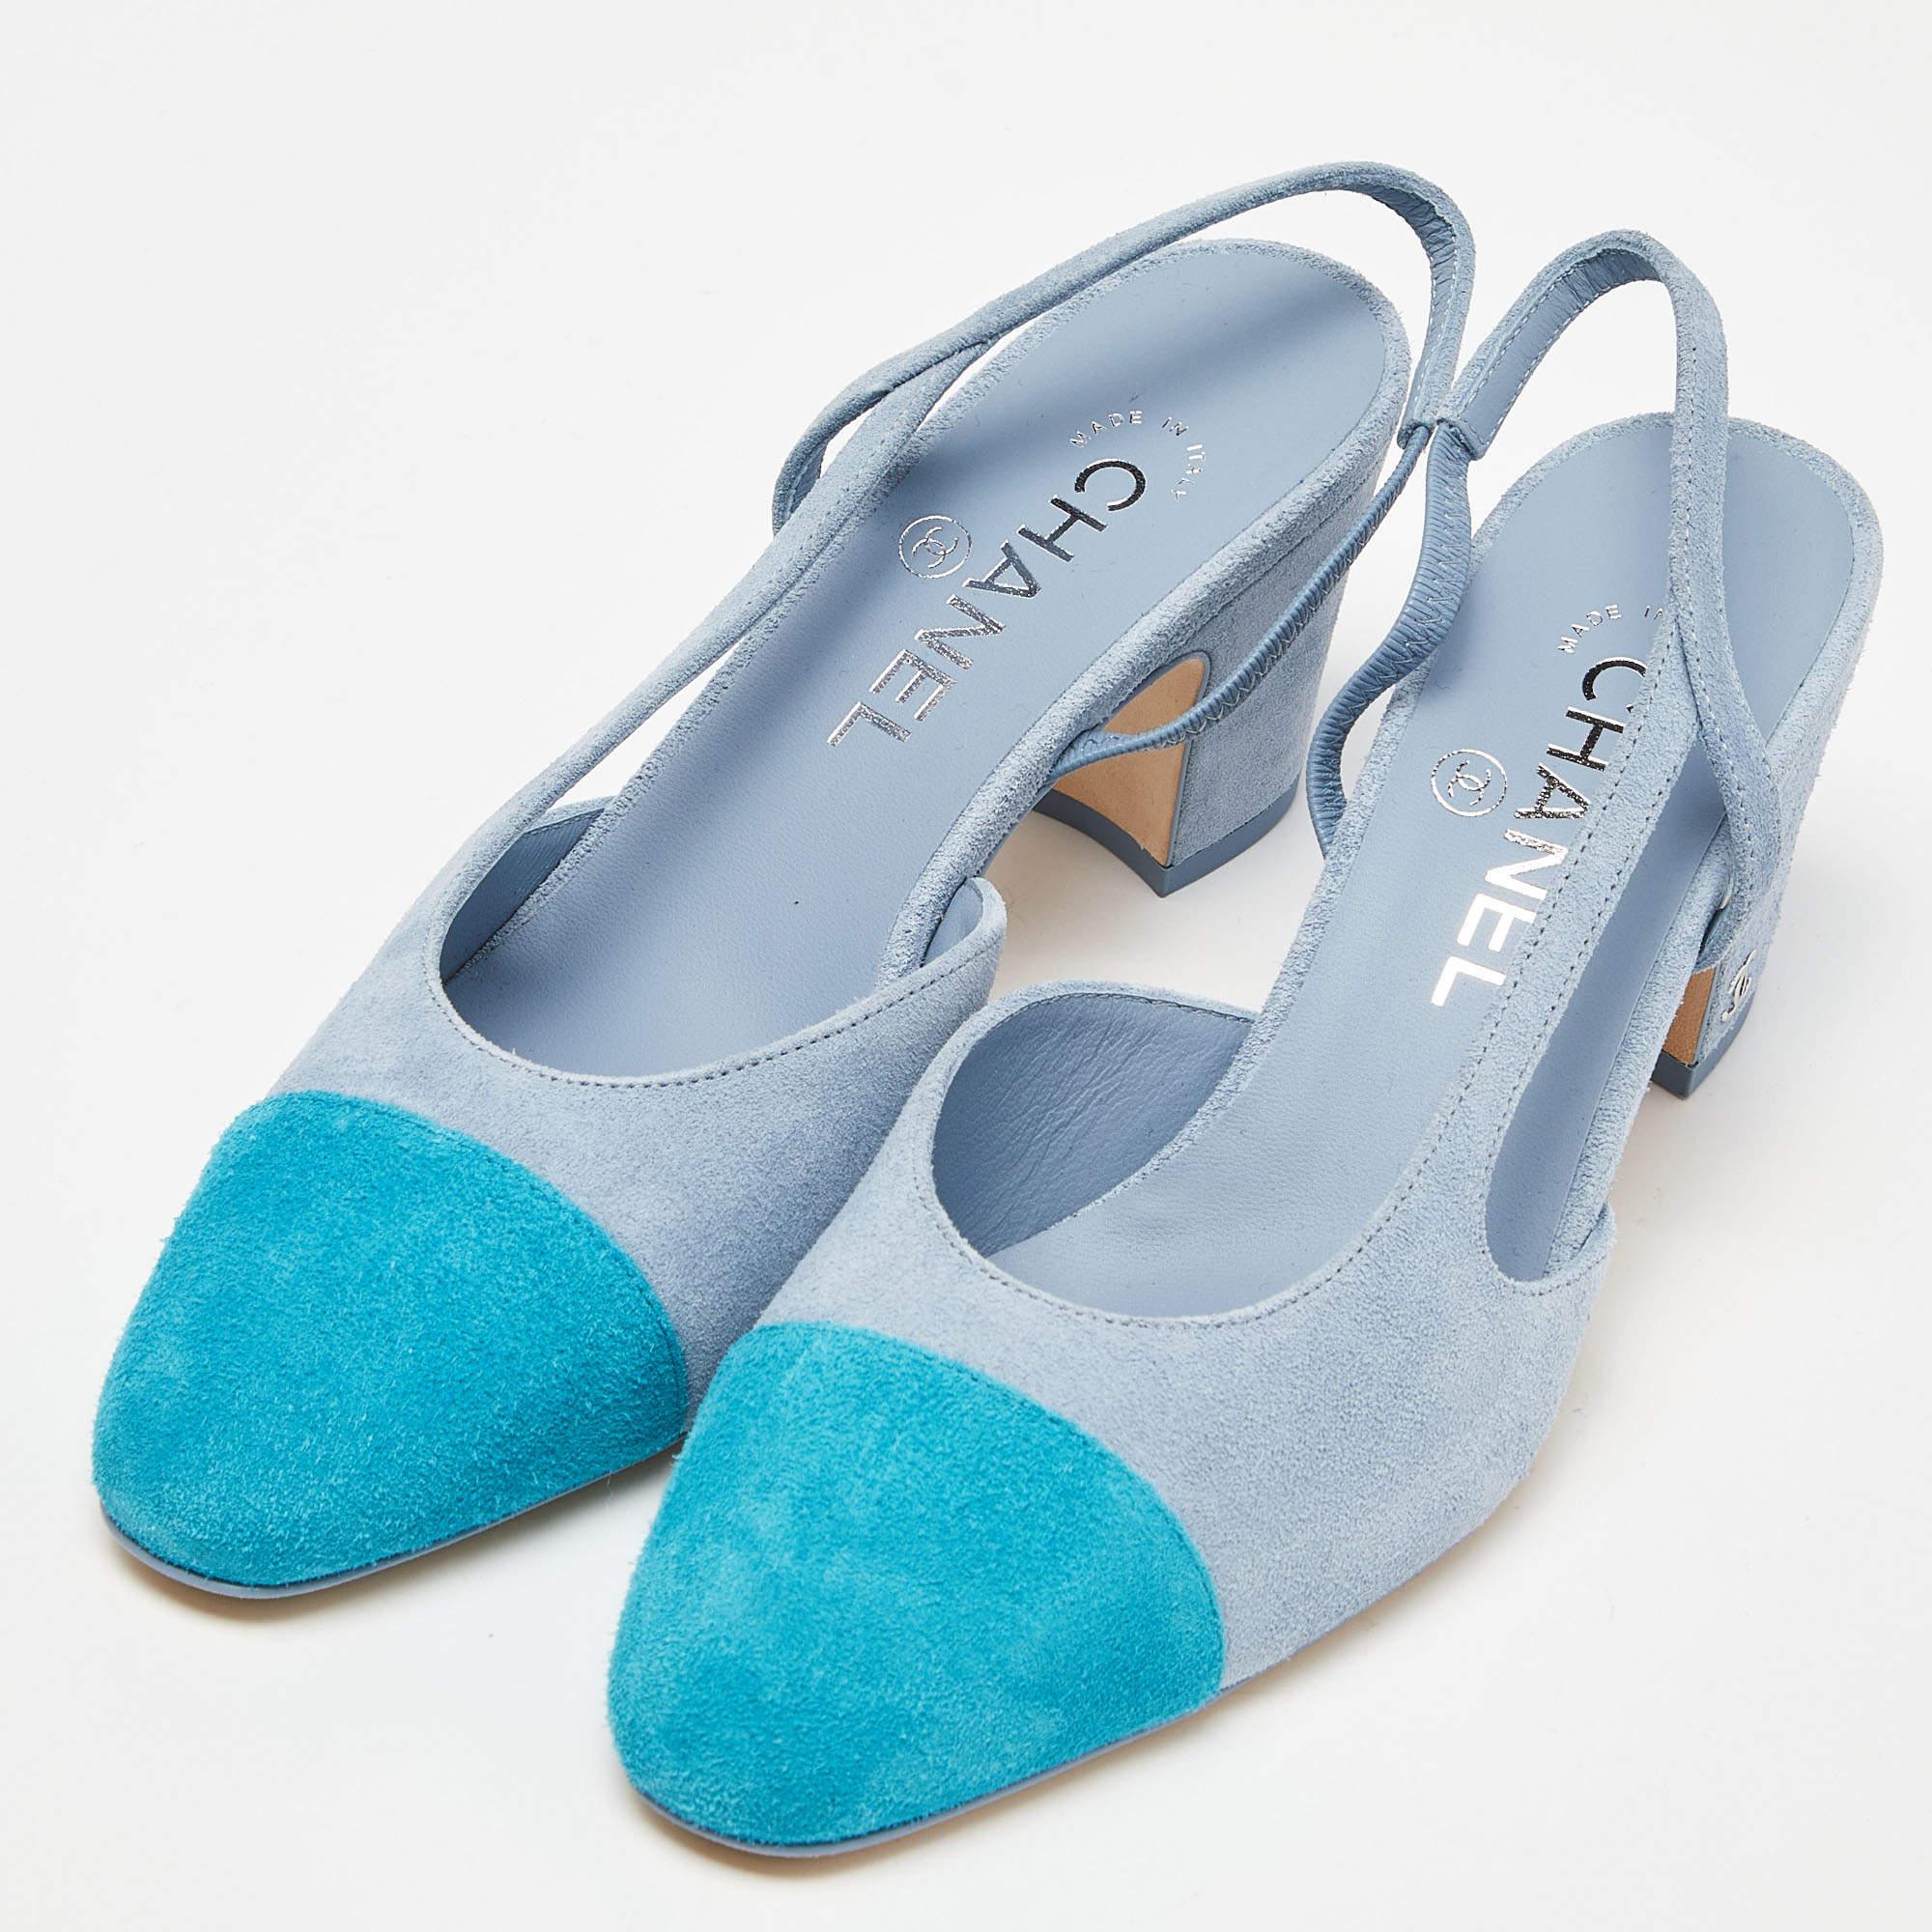 These sandals from the House of Chanel will add a chic touch to your attire. They are created using two tone blue exterior. They flaunt cap toes, a slingback, and block heels. Stay stylish all day with these Chanel sandals.

Includes: Original